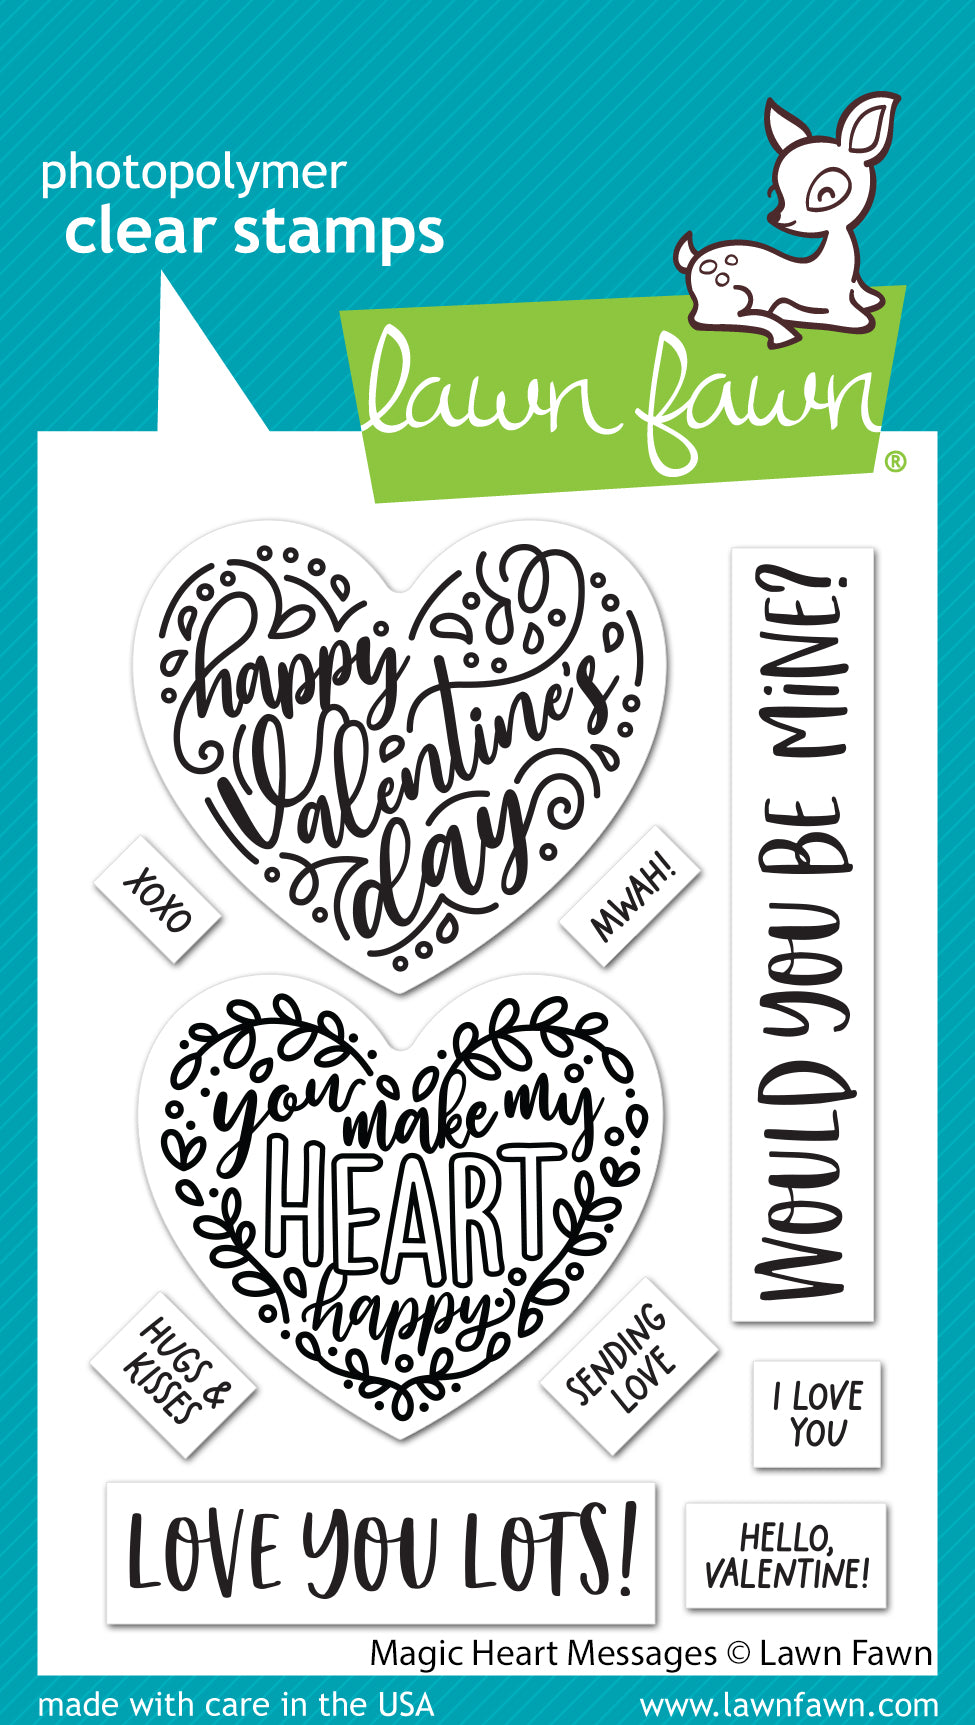 Love from Diagonal Heart stamp